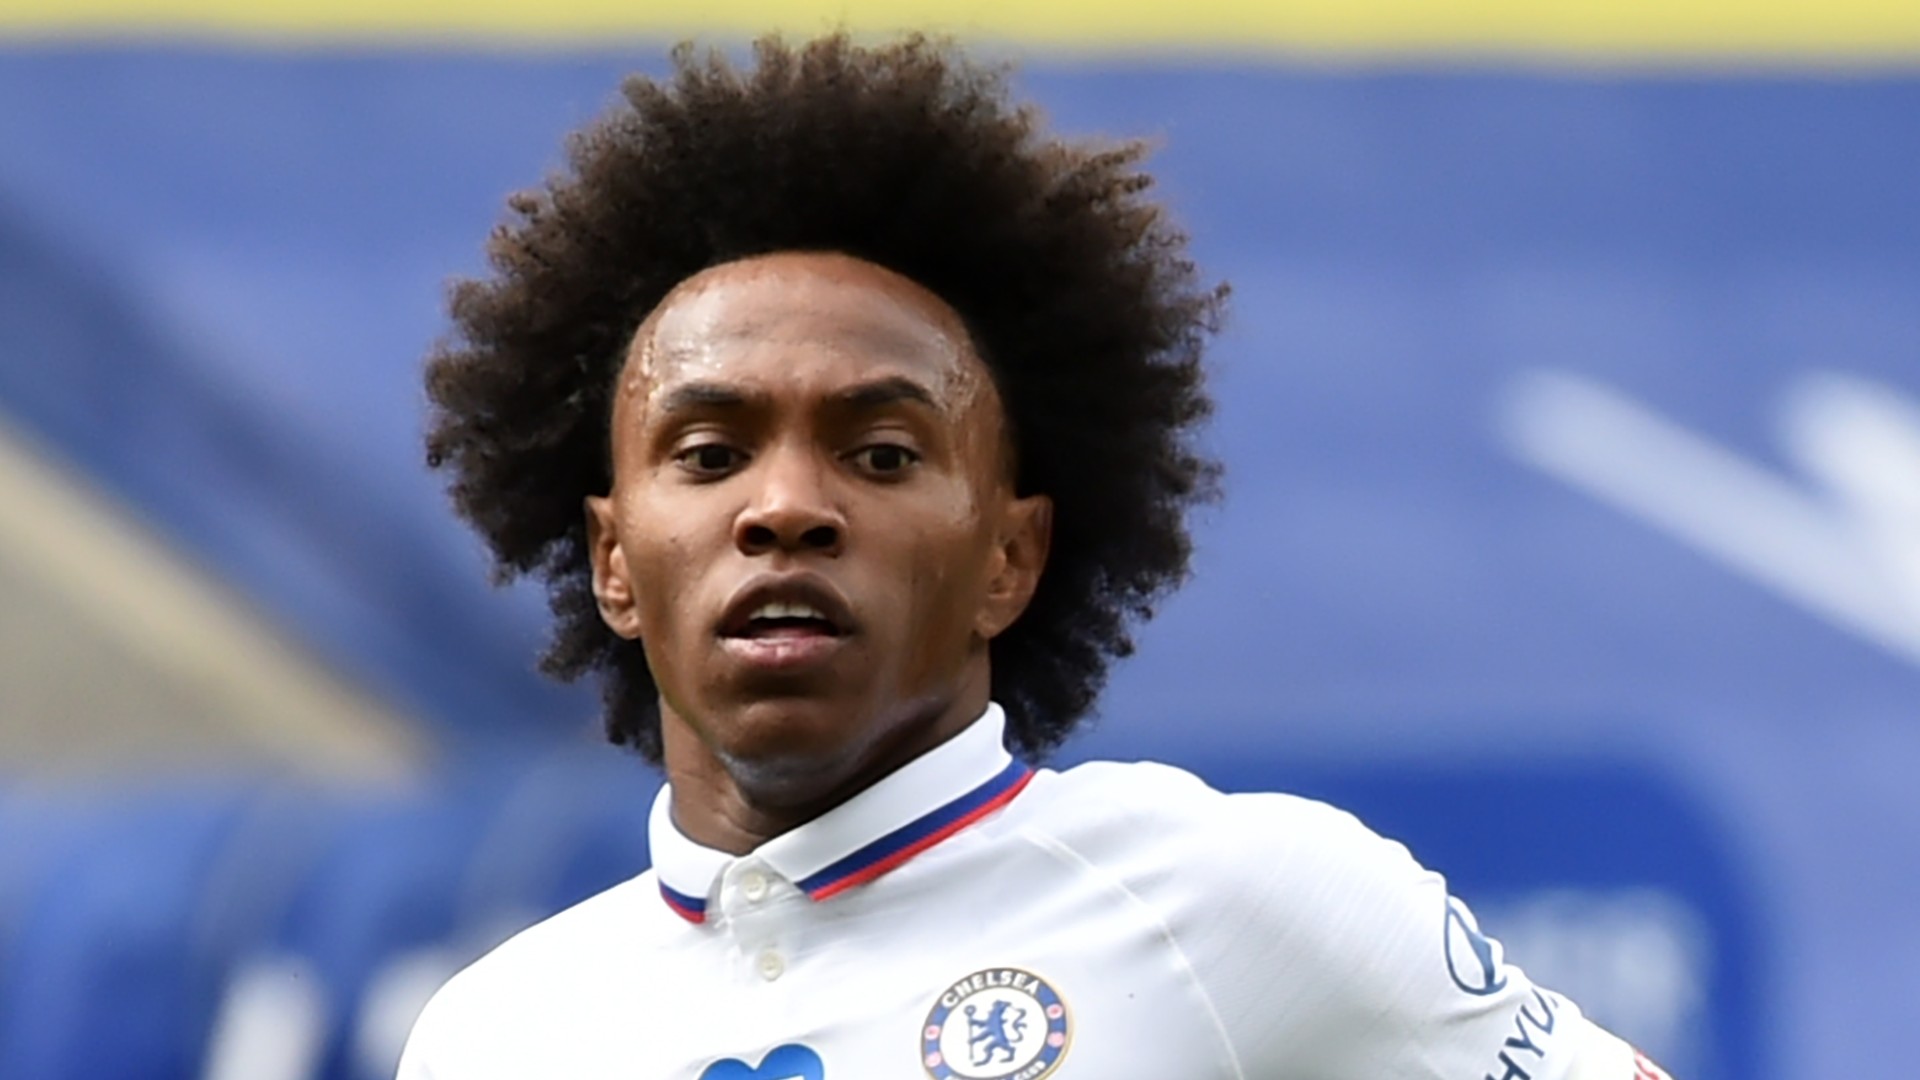 'Willian has two concrete offers from Premier League clubs' - Arsenal-linked Chelsea star to decide future when season ends, says Joorabchian